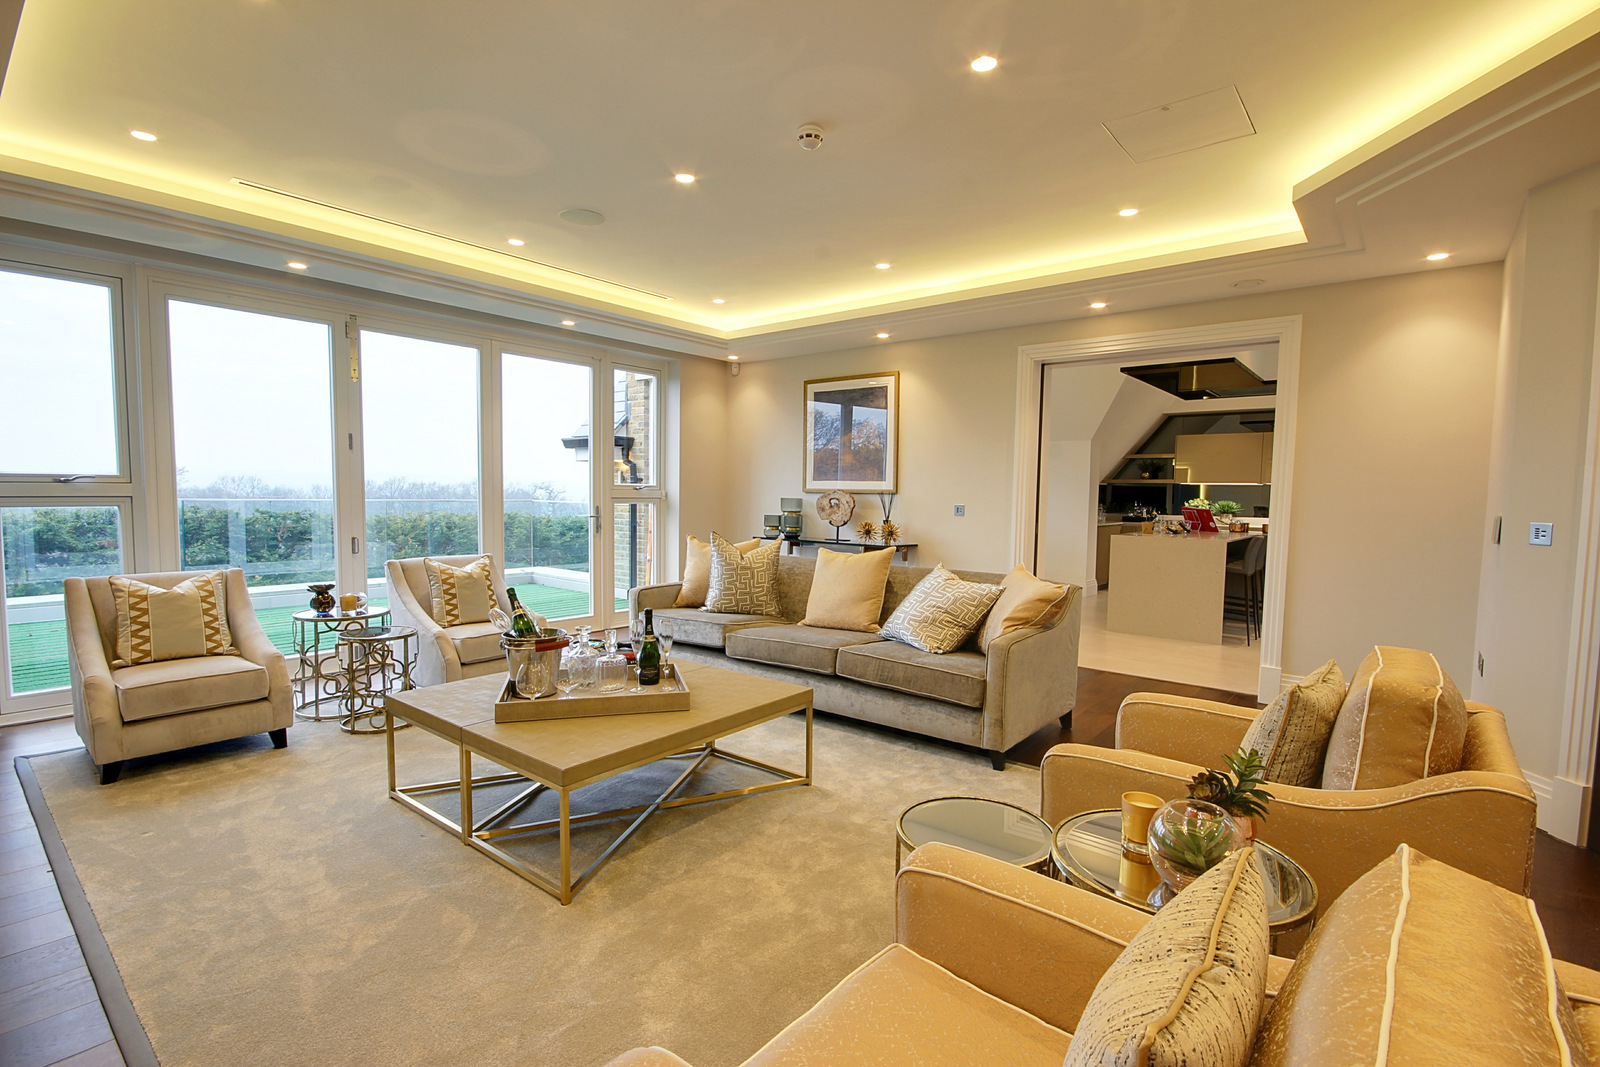 ONE OF NORTH LONDON\u2019S MOST LUXURIOUS PENTHOUSE APARTMENTS LAUNCHES FOR SALE - Heronslea